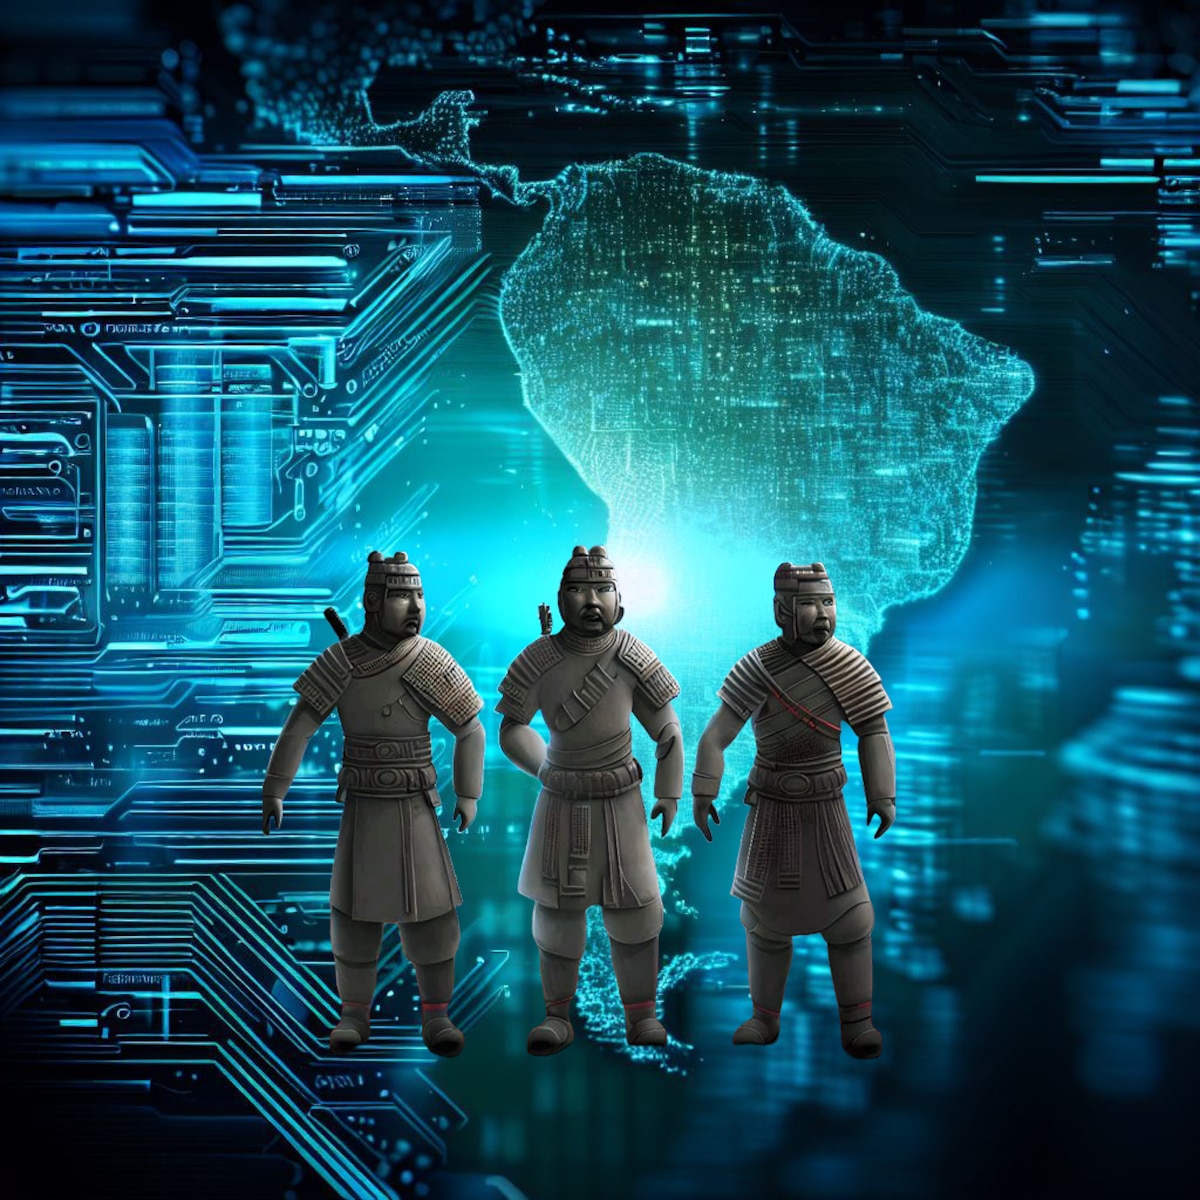 Cyber versions of the Terracotta Army march into South America